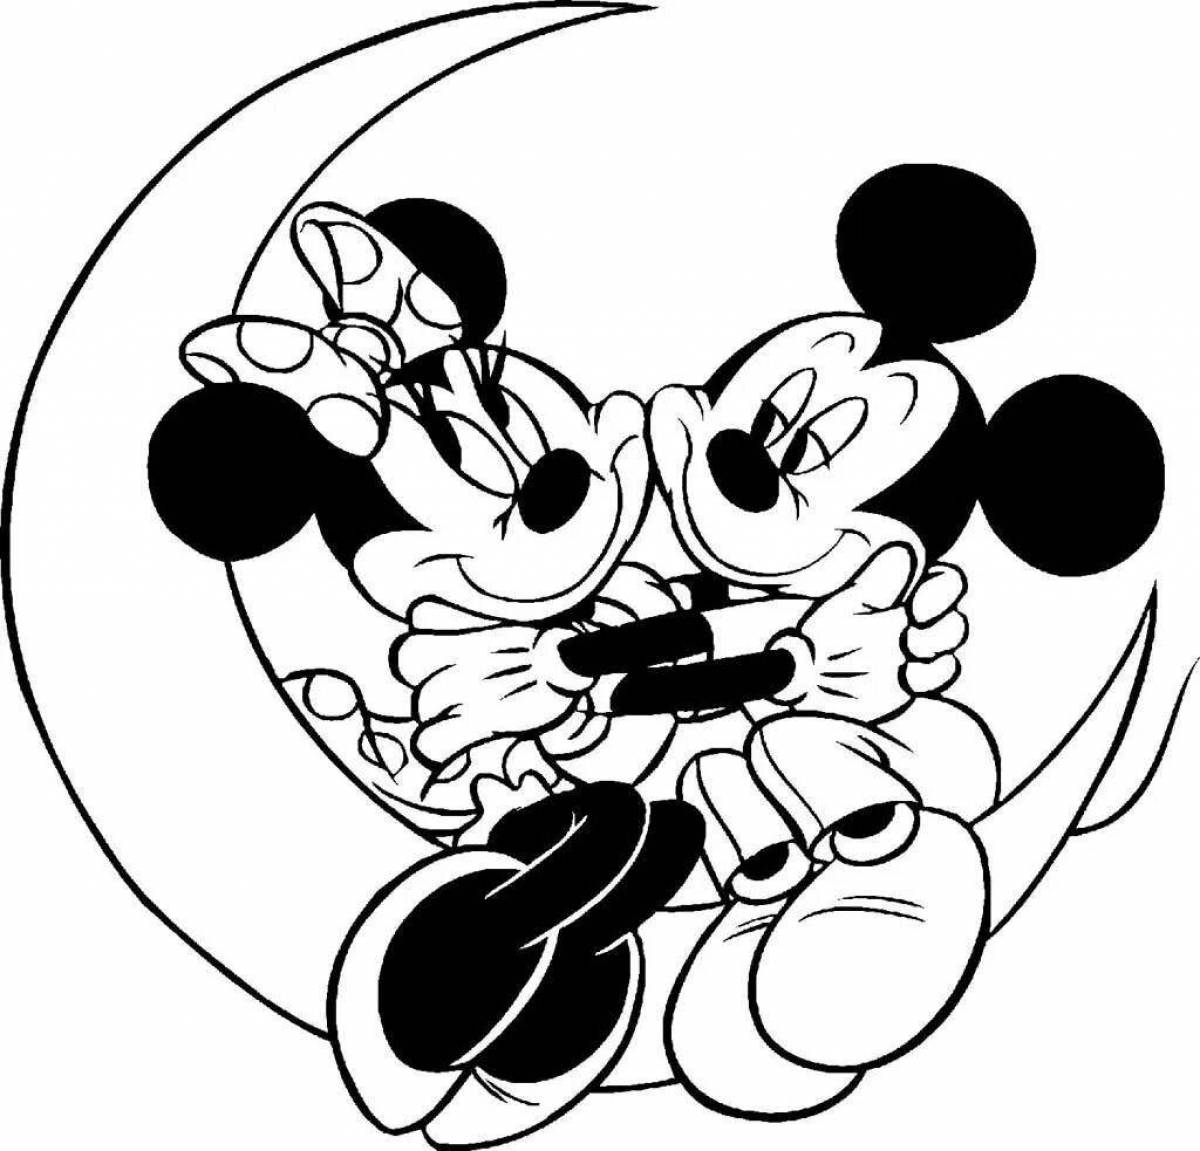 Cute mickey mouse coloring book for kids